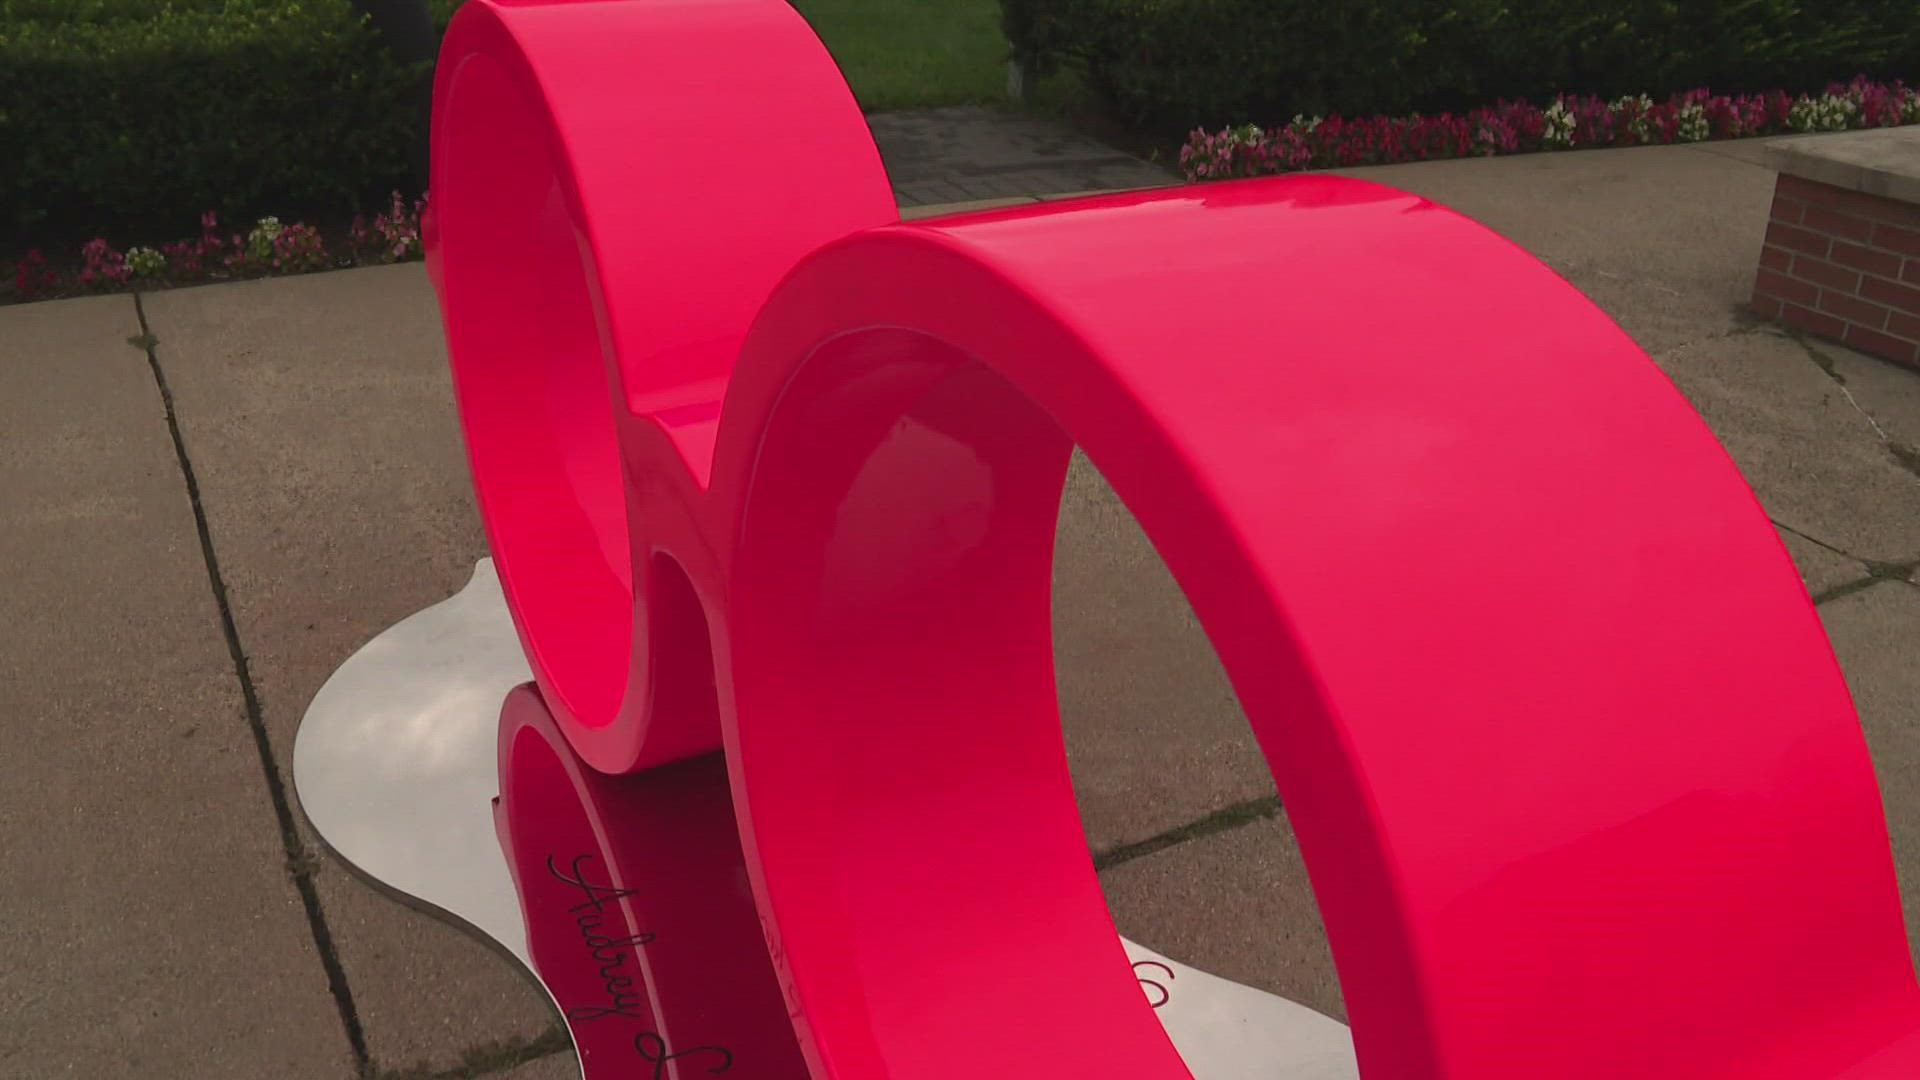 Artist Sam Noordhoff was inspired to create the sculpture "Red Glasses" after a 5-year-old girl passed away in 2018. She was known for her red glasses.